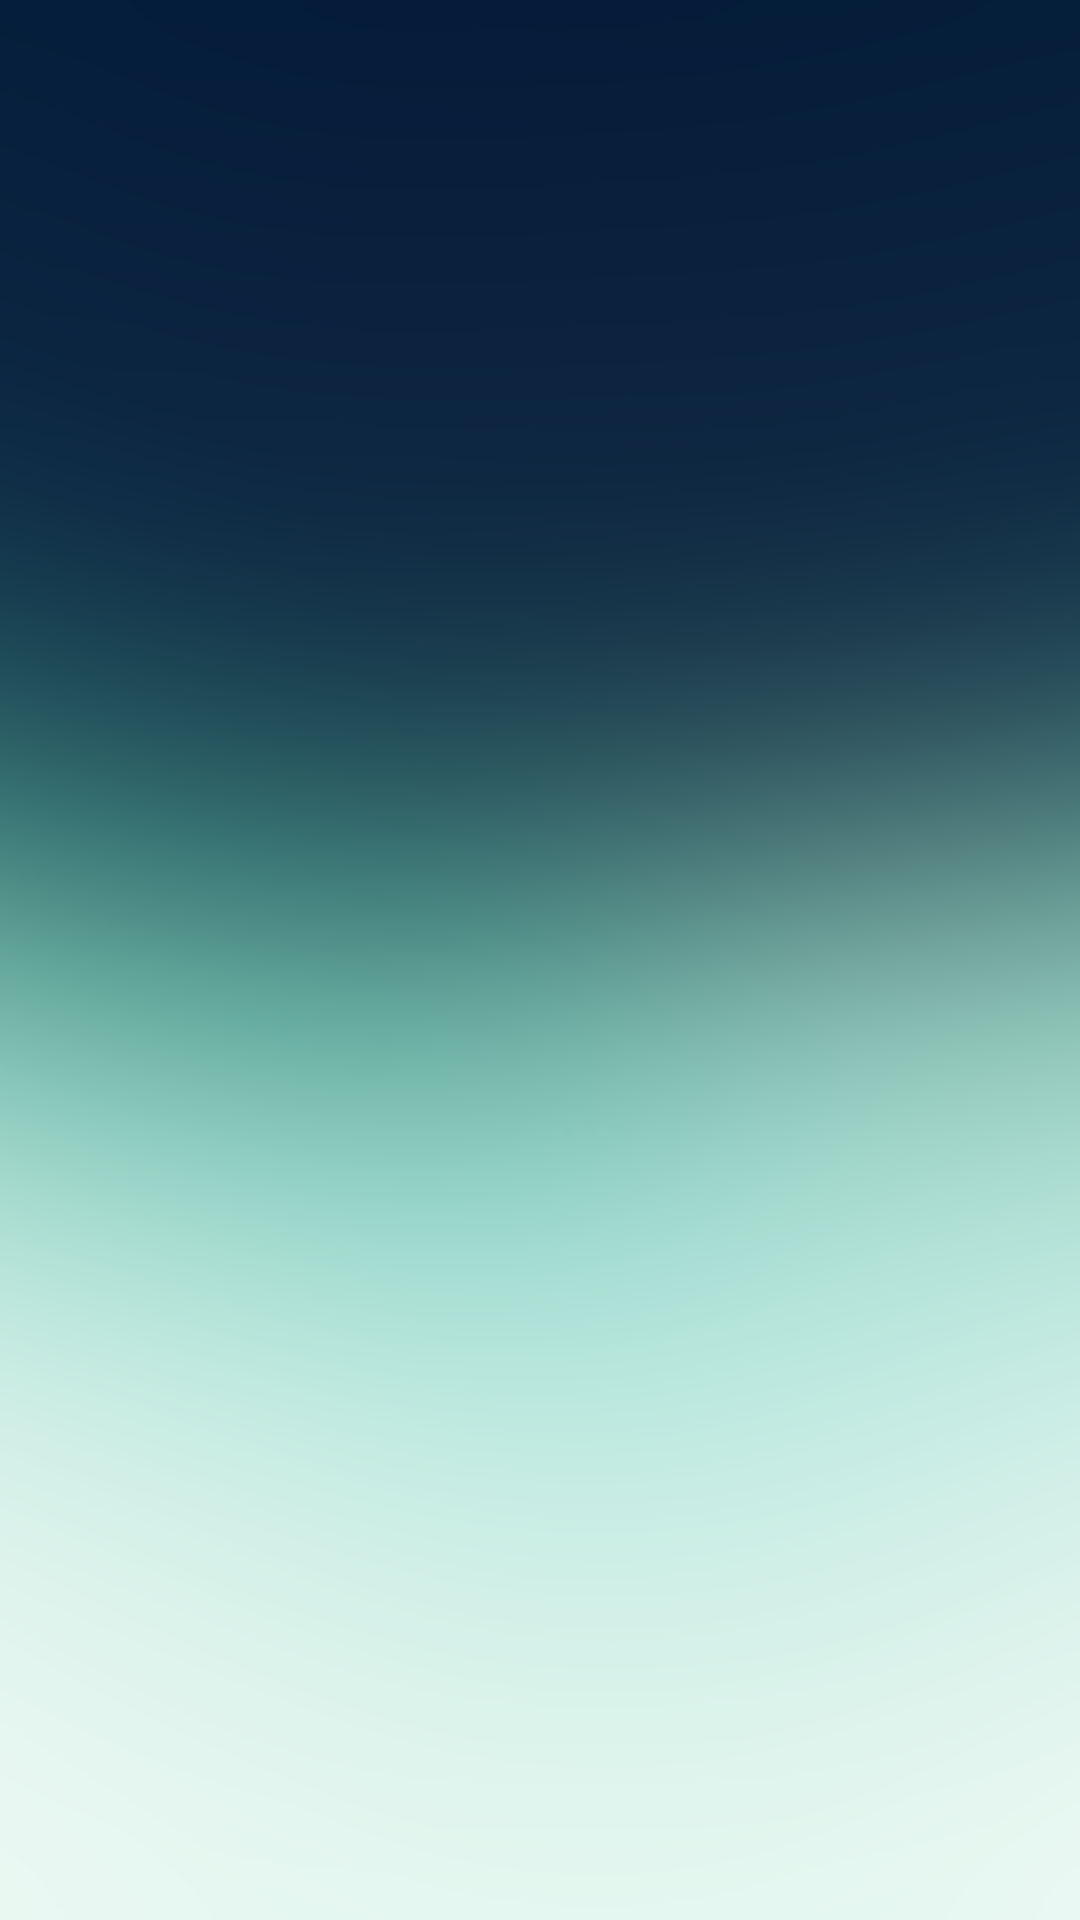 Green Blue Gradient Android Wallpaper